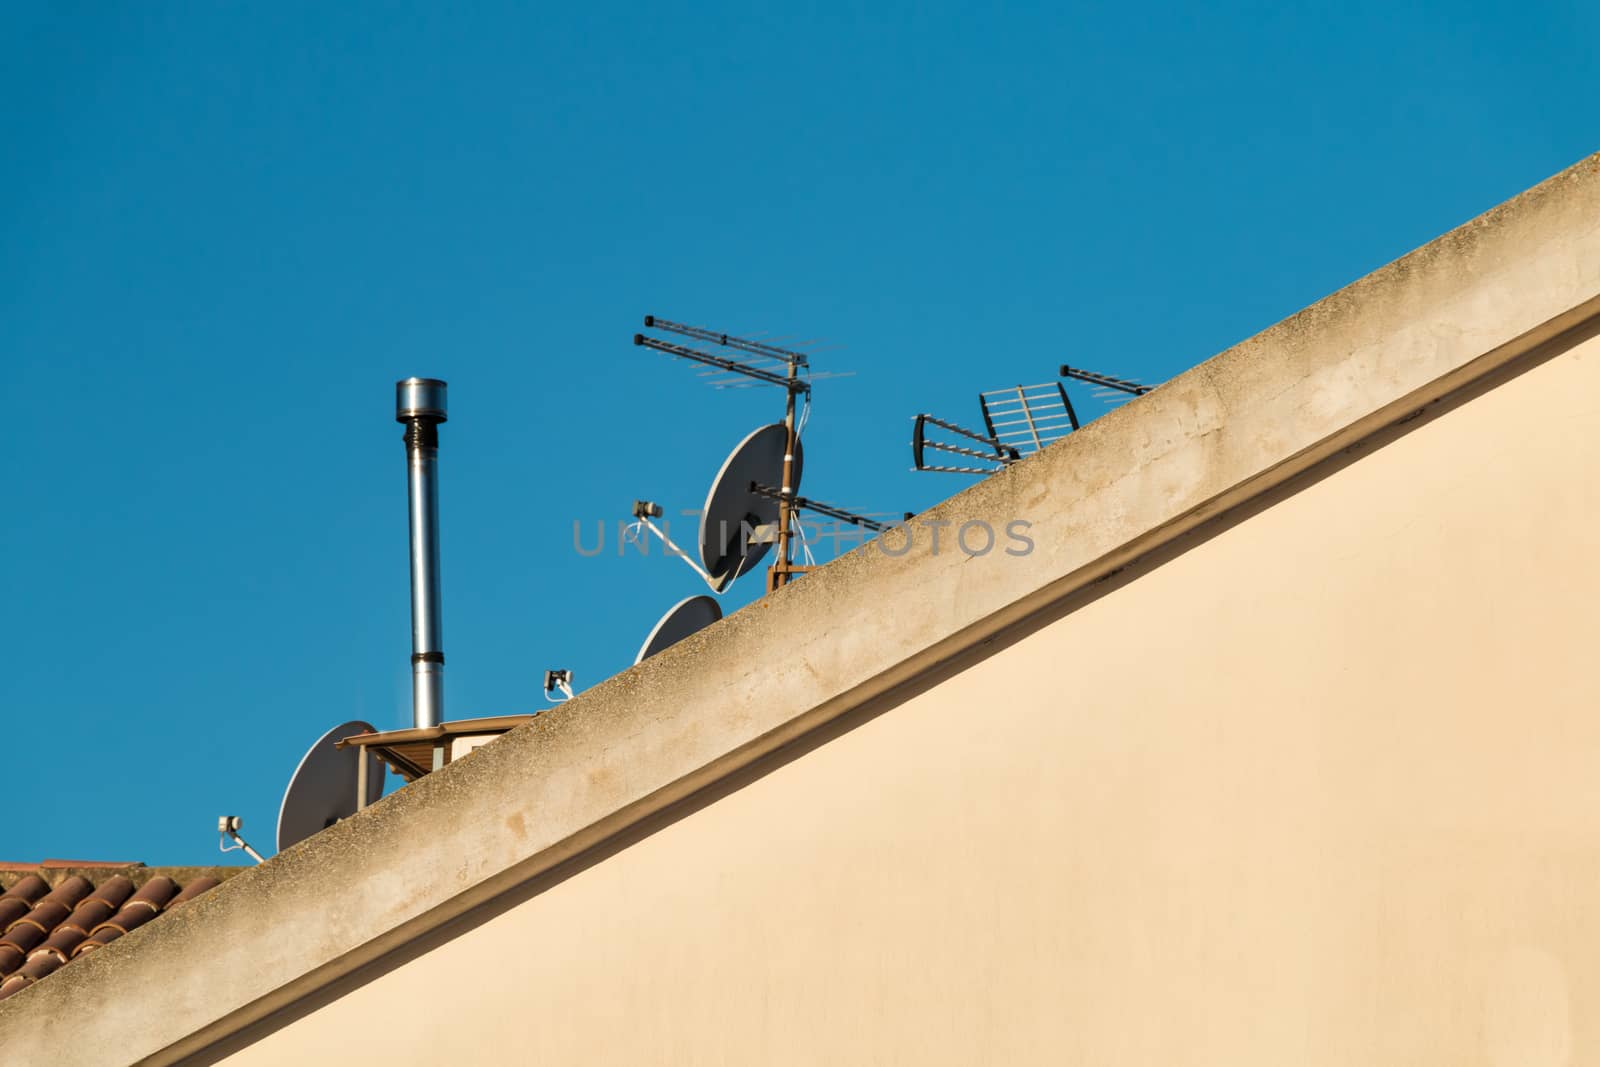 Roof with antennas for TV reception